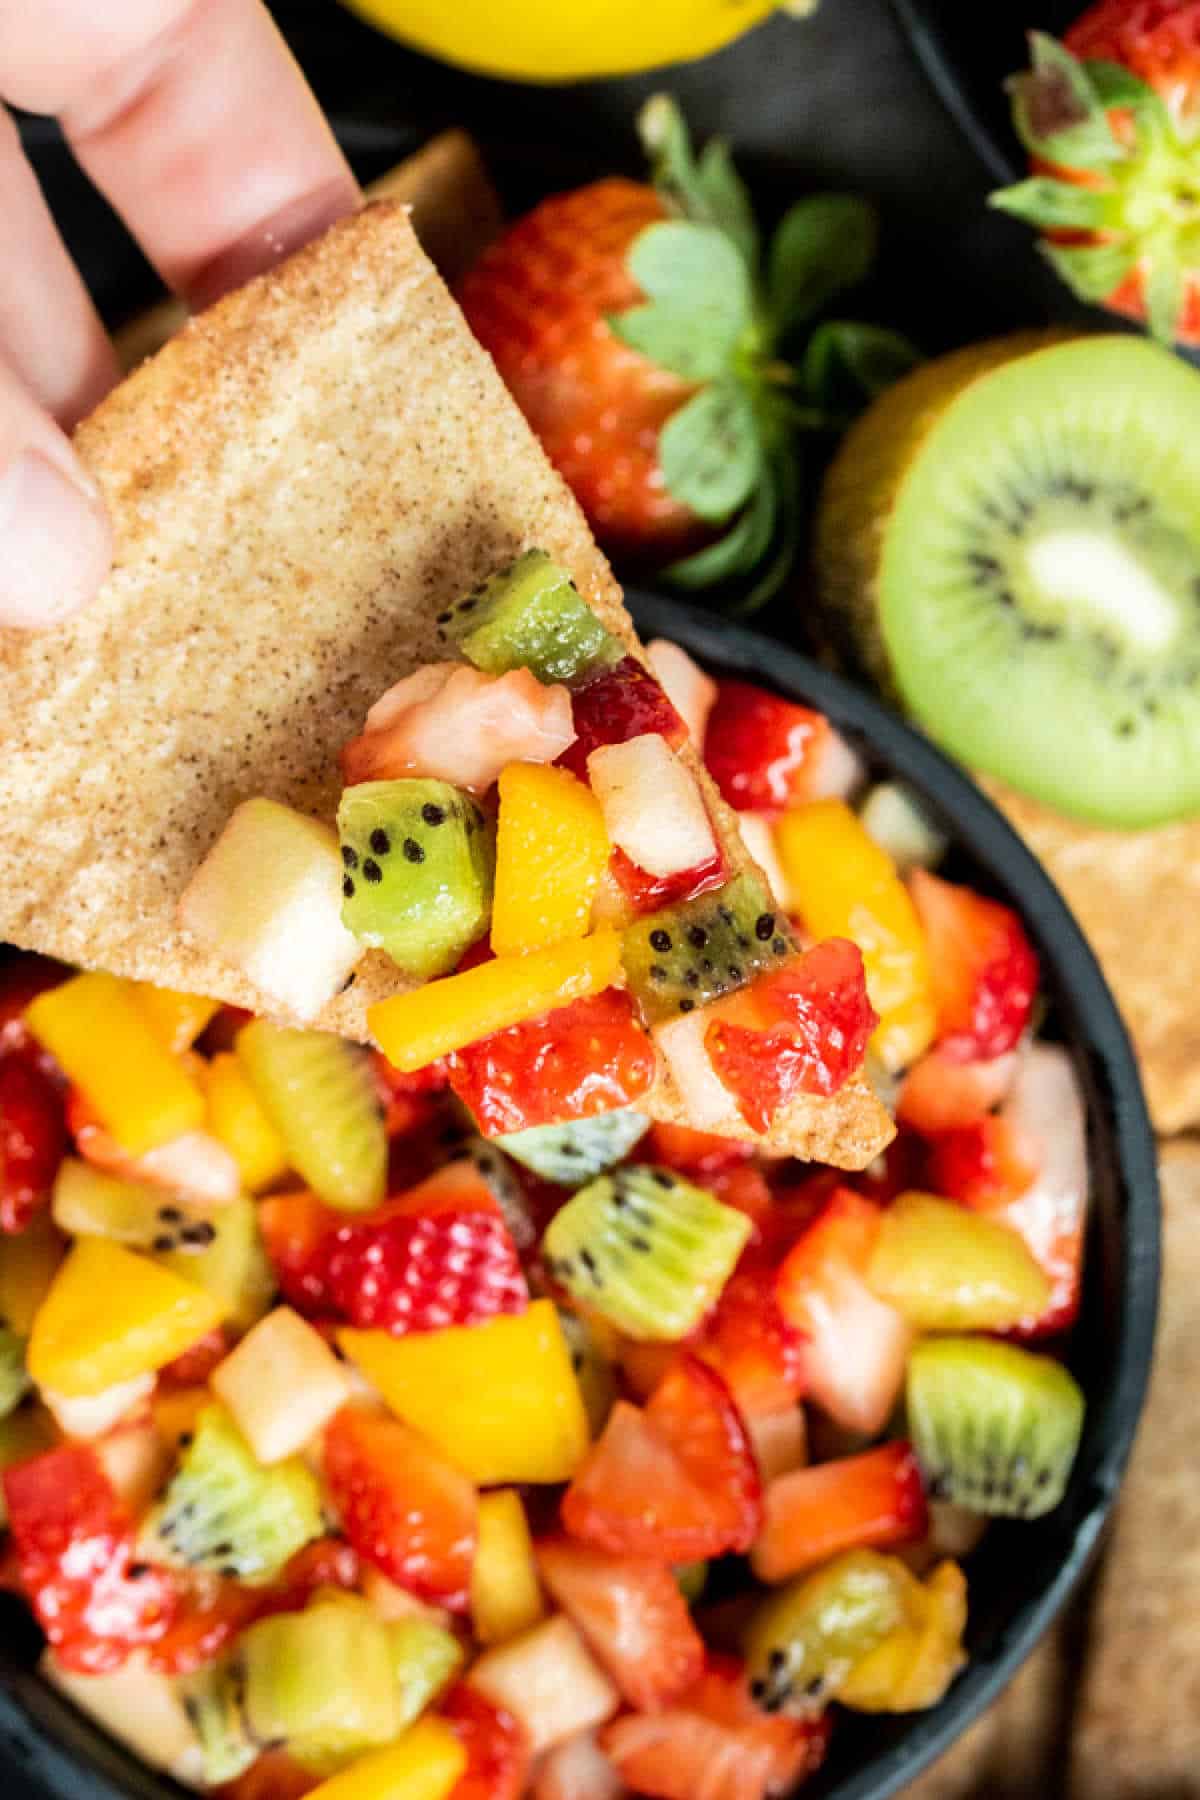 Scoop of fruit salsa on a baked cinnamon chip